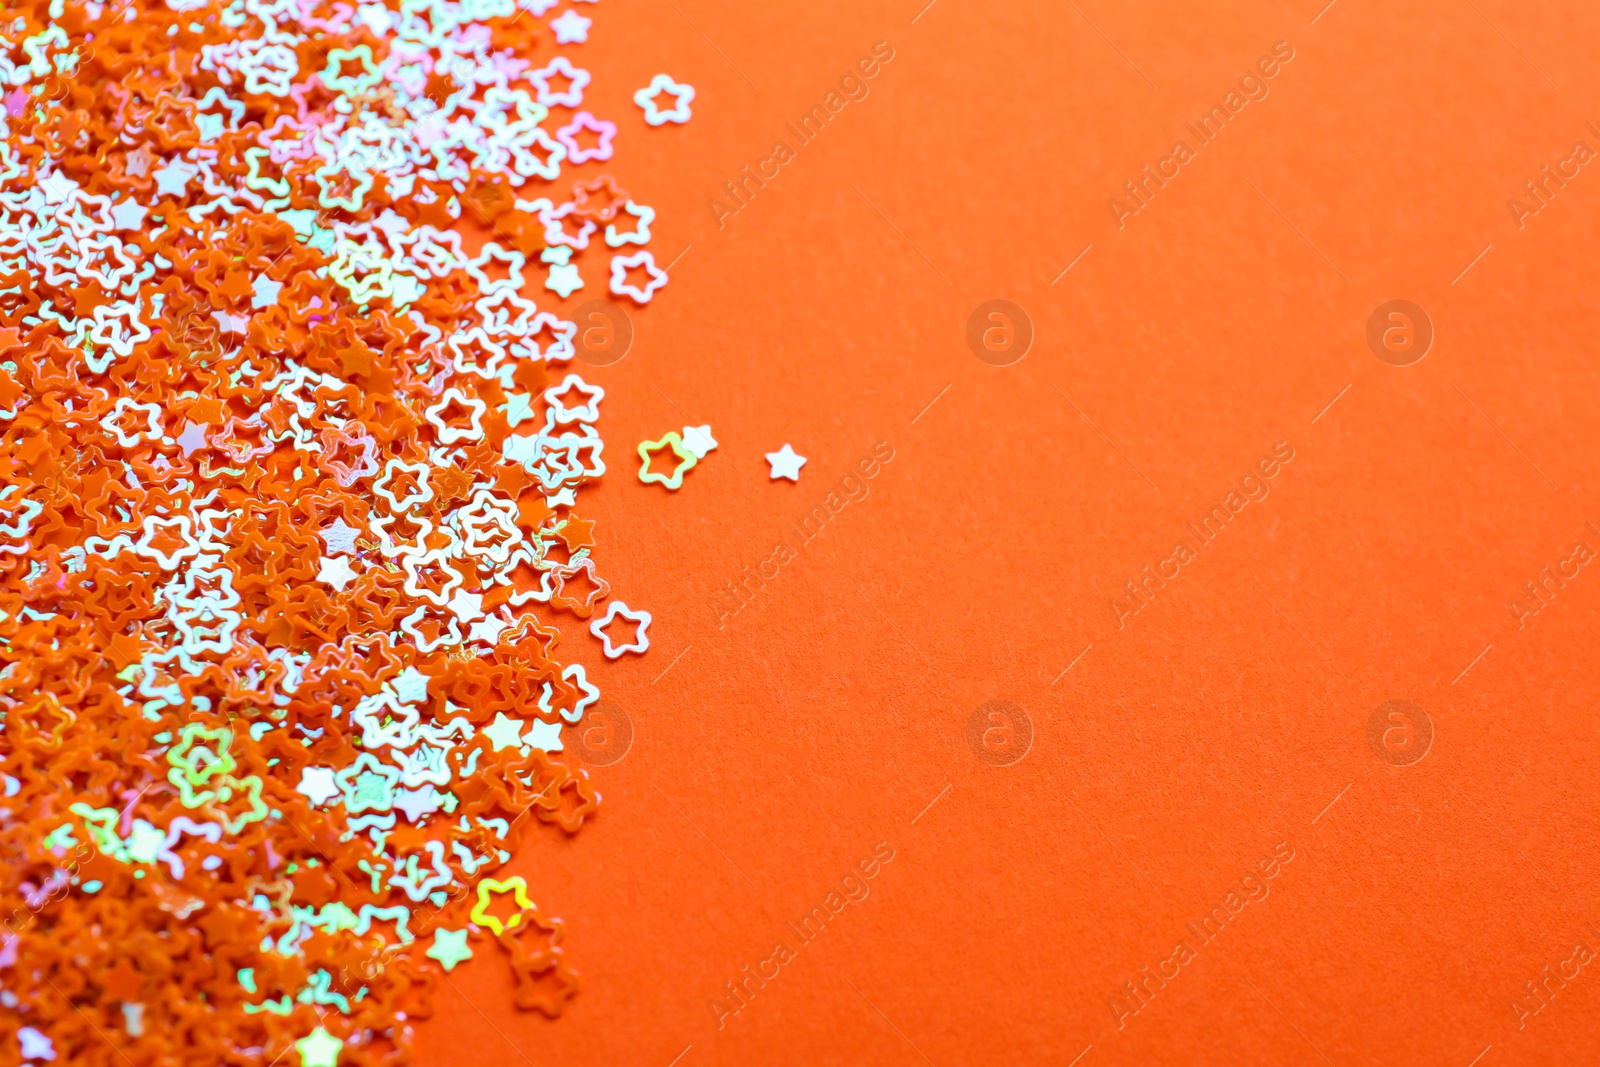 Photo of Shiny bright star shaped glitter on orange background. Space for text